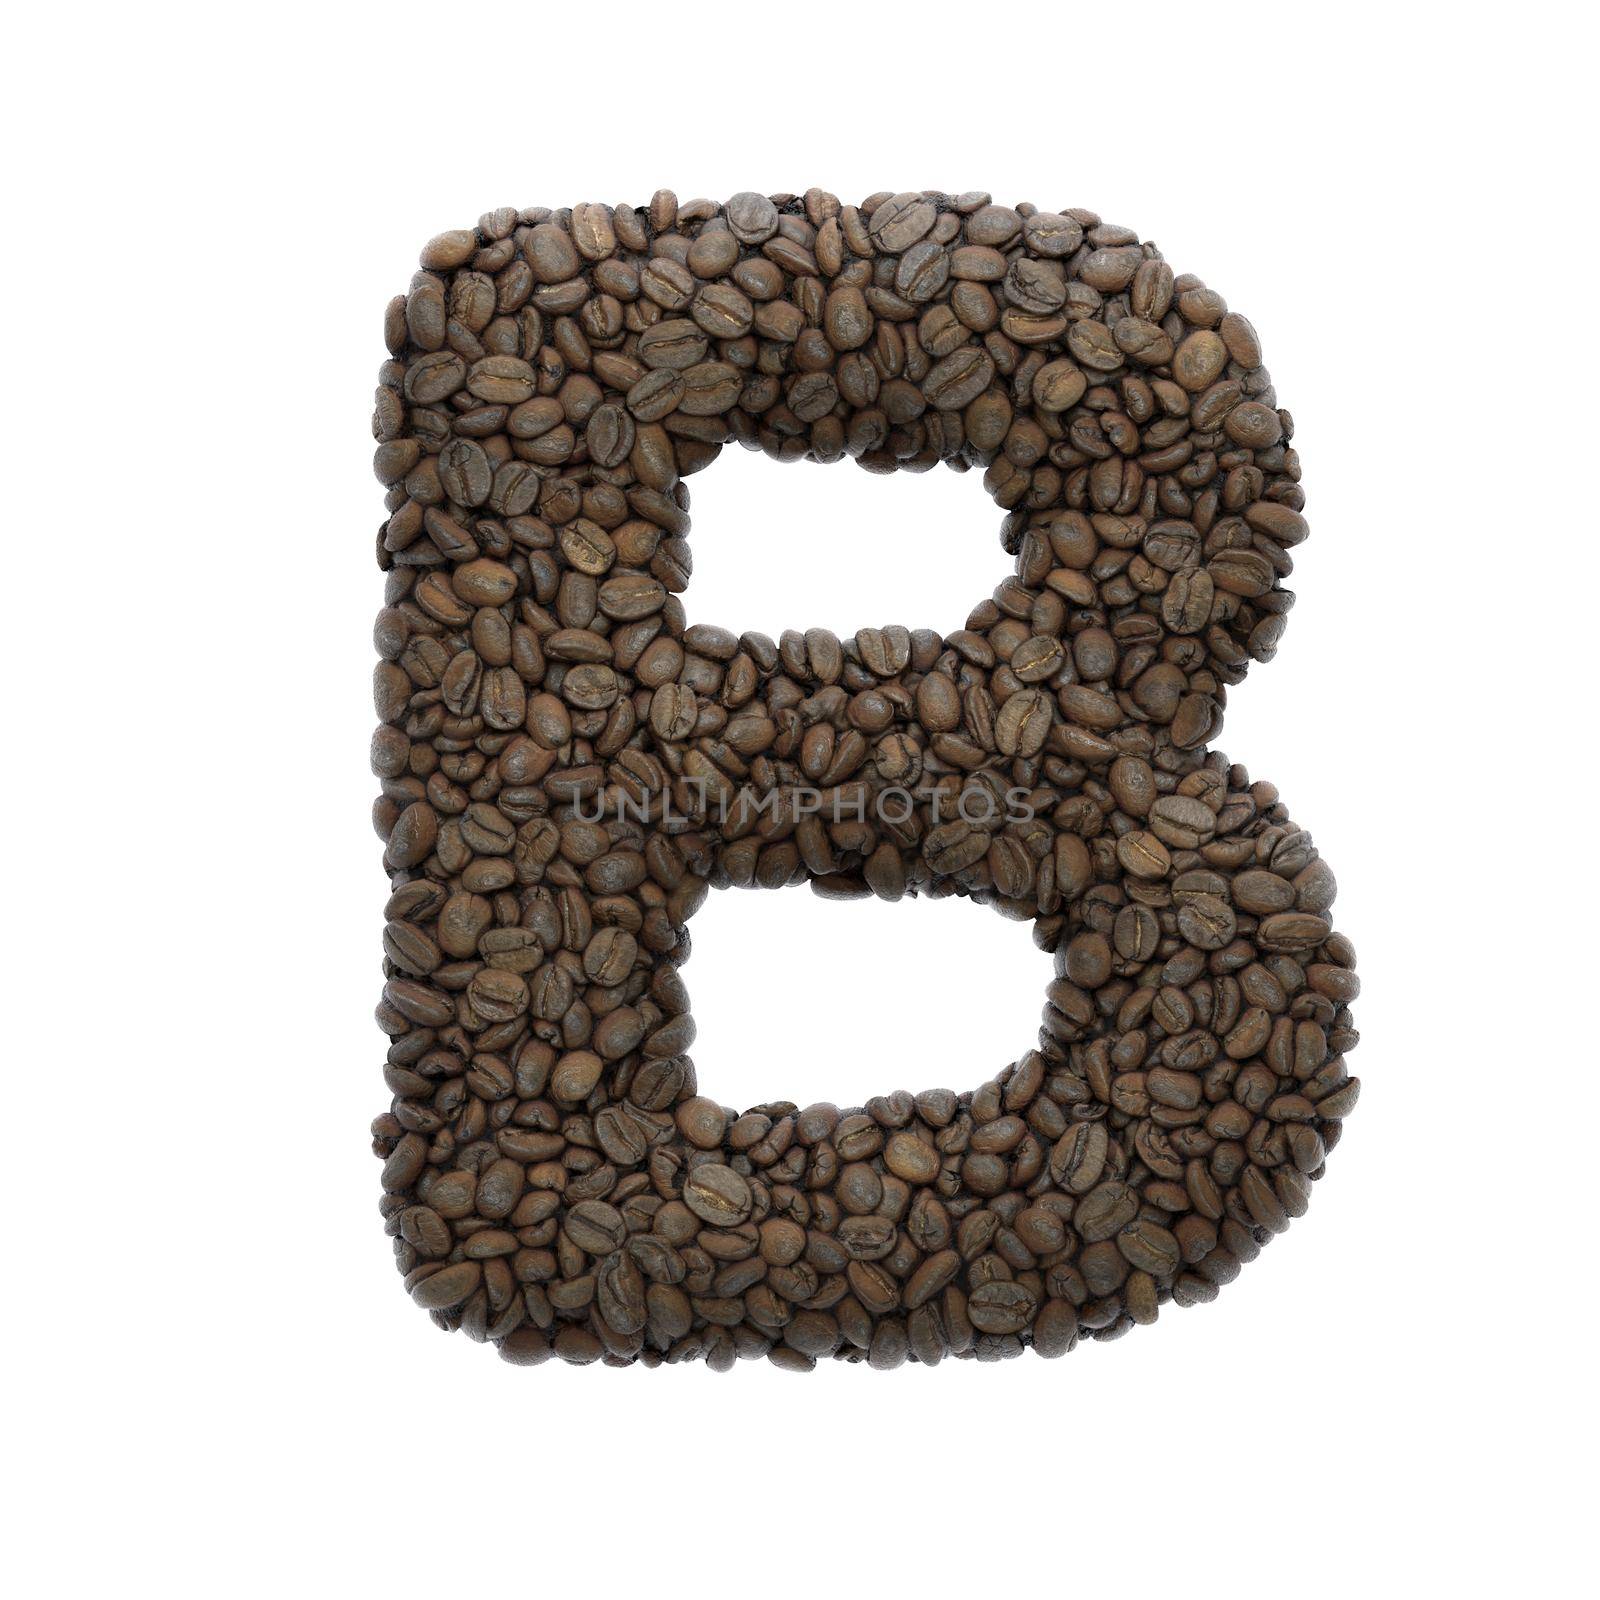 Coffee letter B - Capital 3d roasted beans font - suitable for Coffee, energy or insomnia related subjects by chrisroll